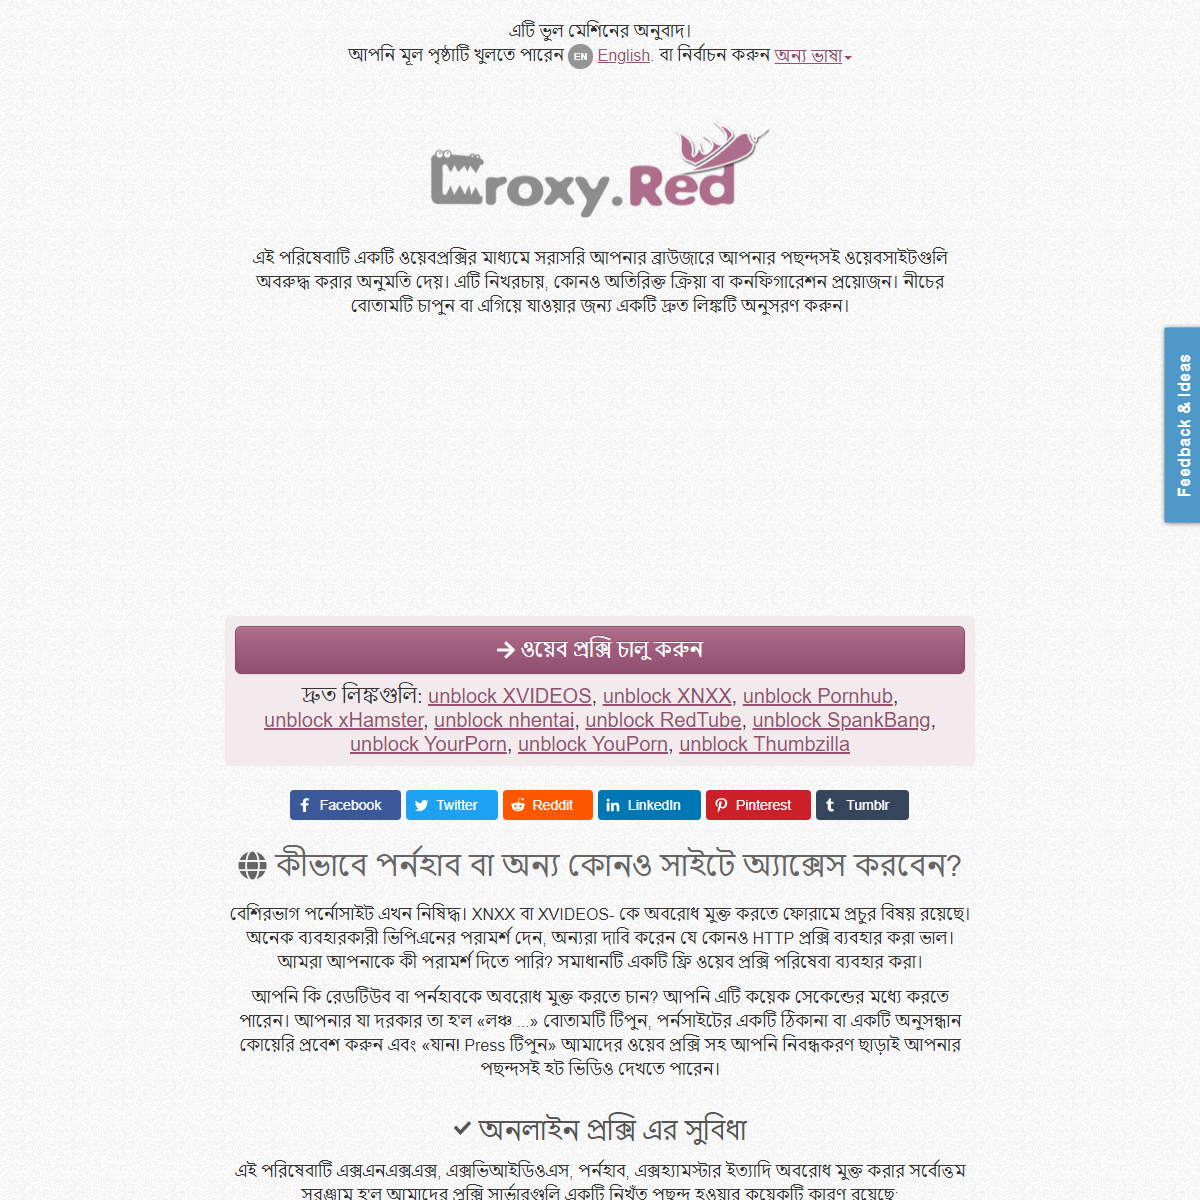 A complete backup of https://www.croxy.red/_bn/?__cpLangSet=1